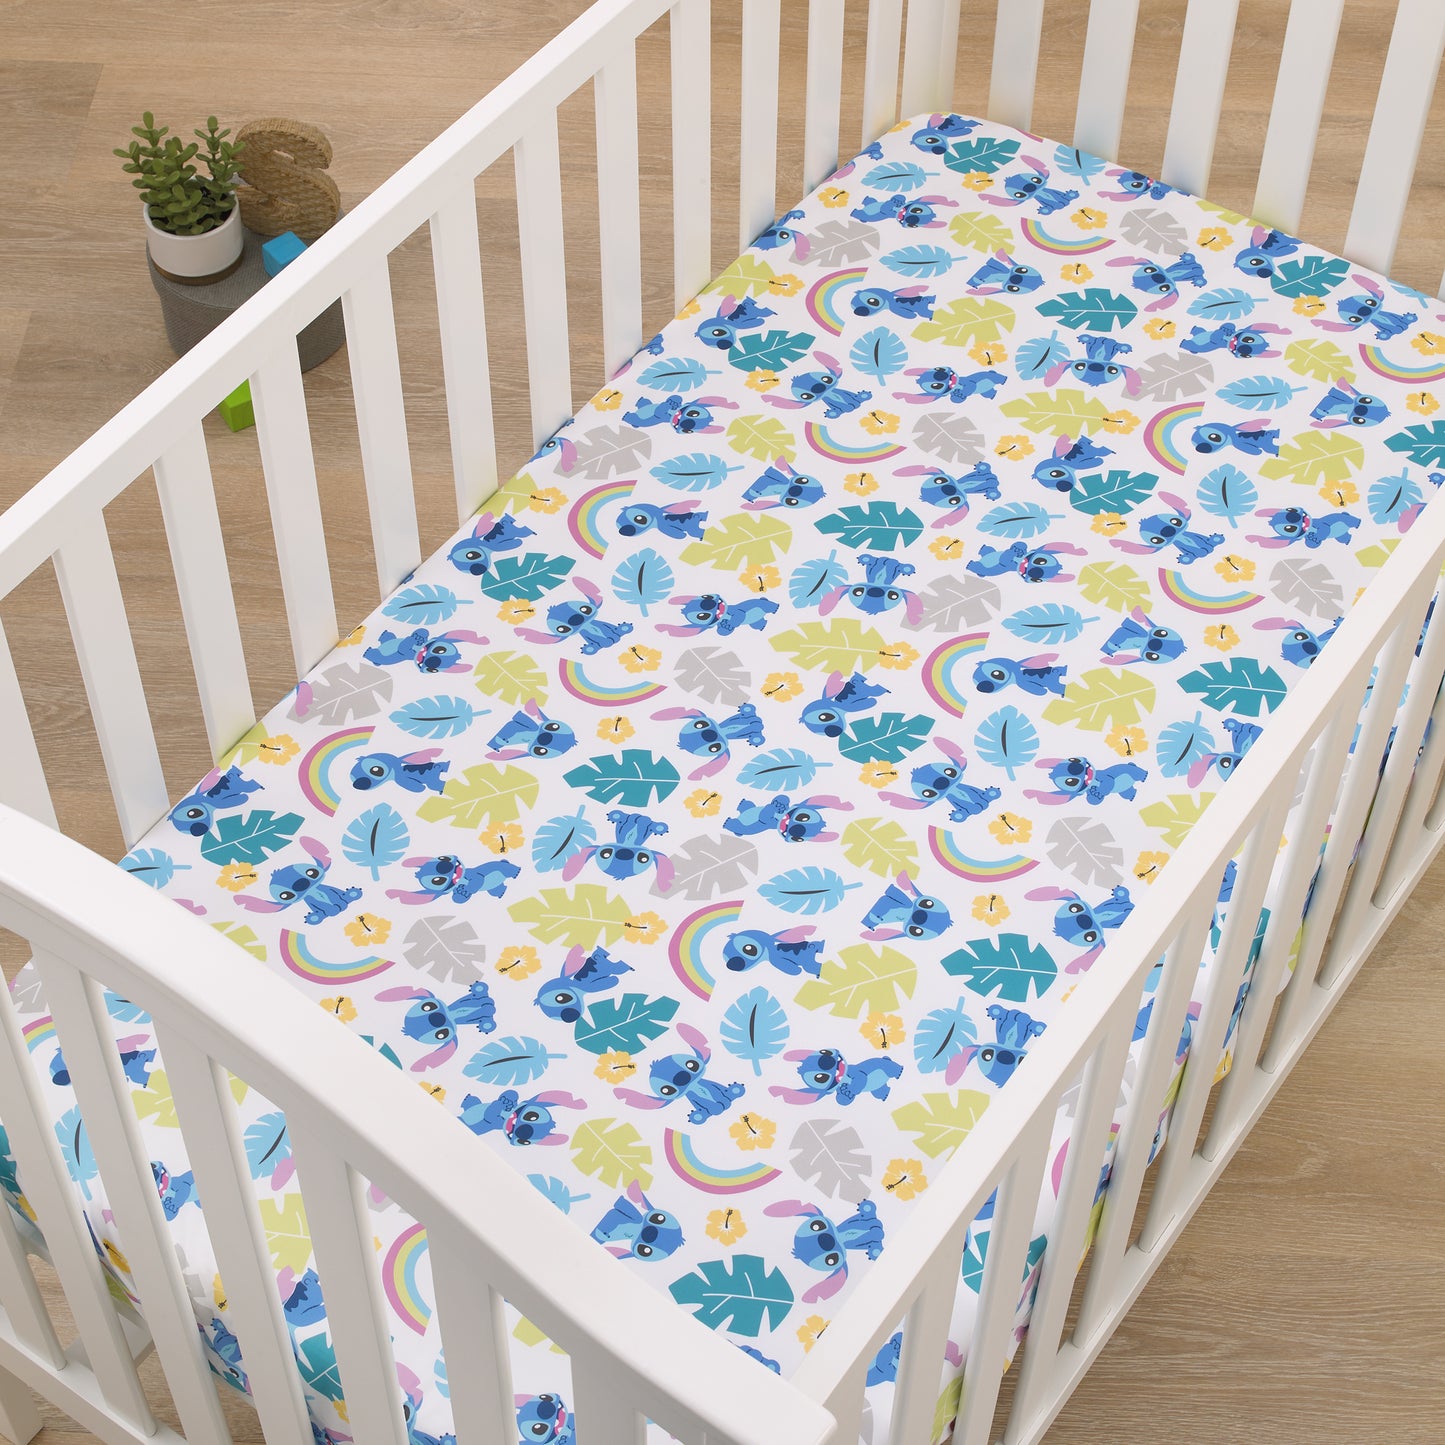 Disney Stitch Blue, Teal, Lime, and White Nursery Fitted Mini Crib Sheet